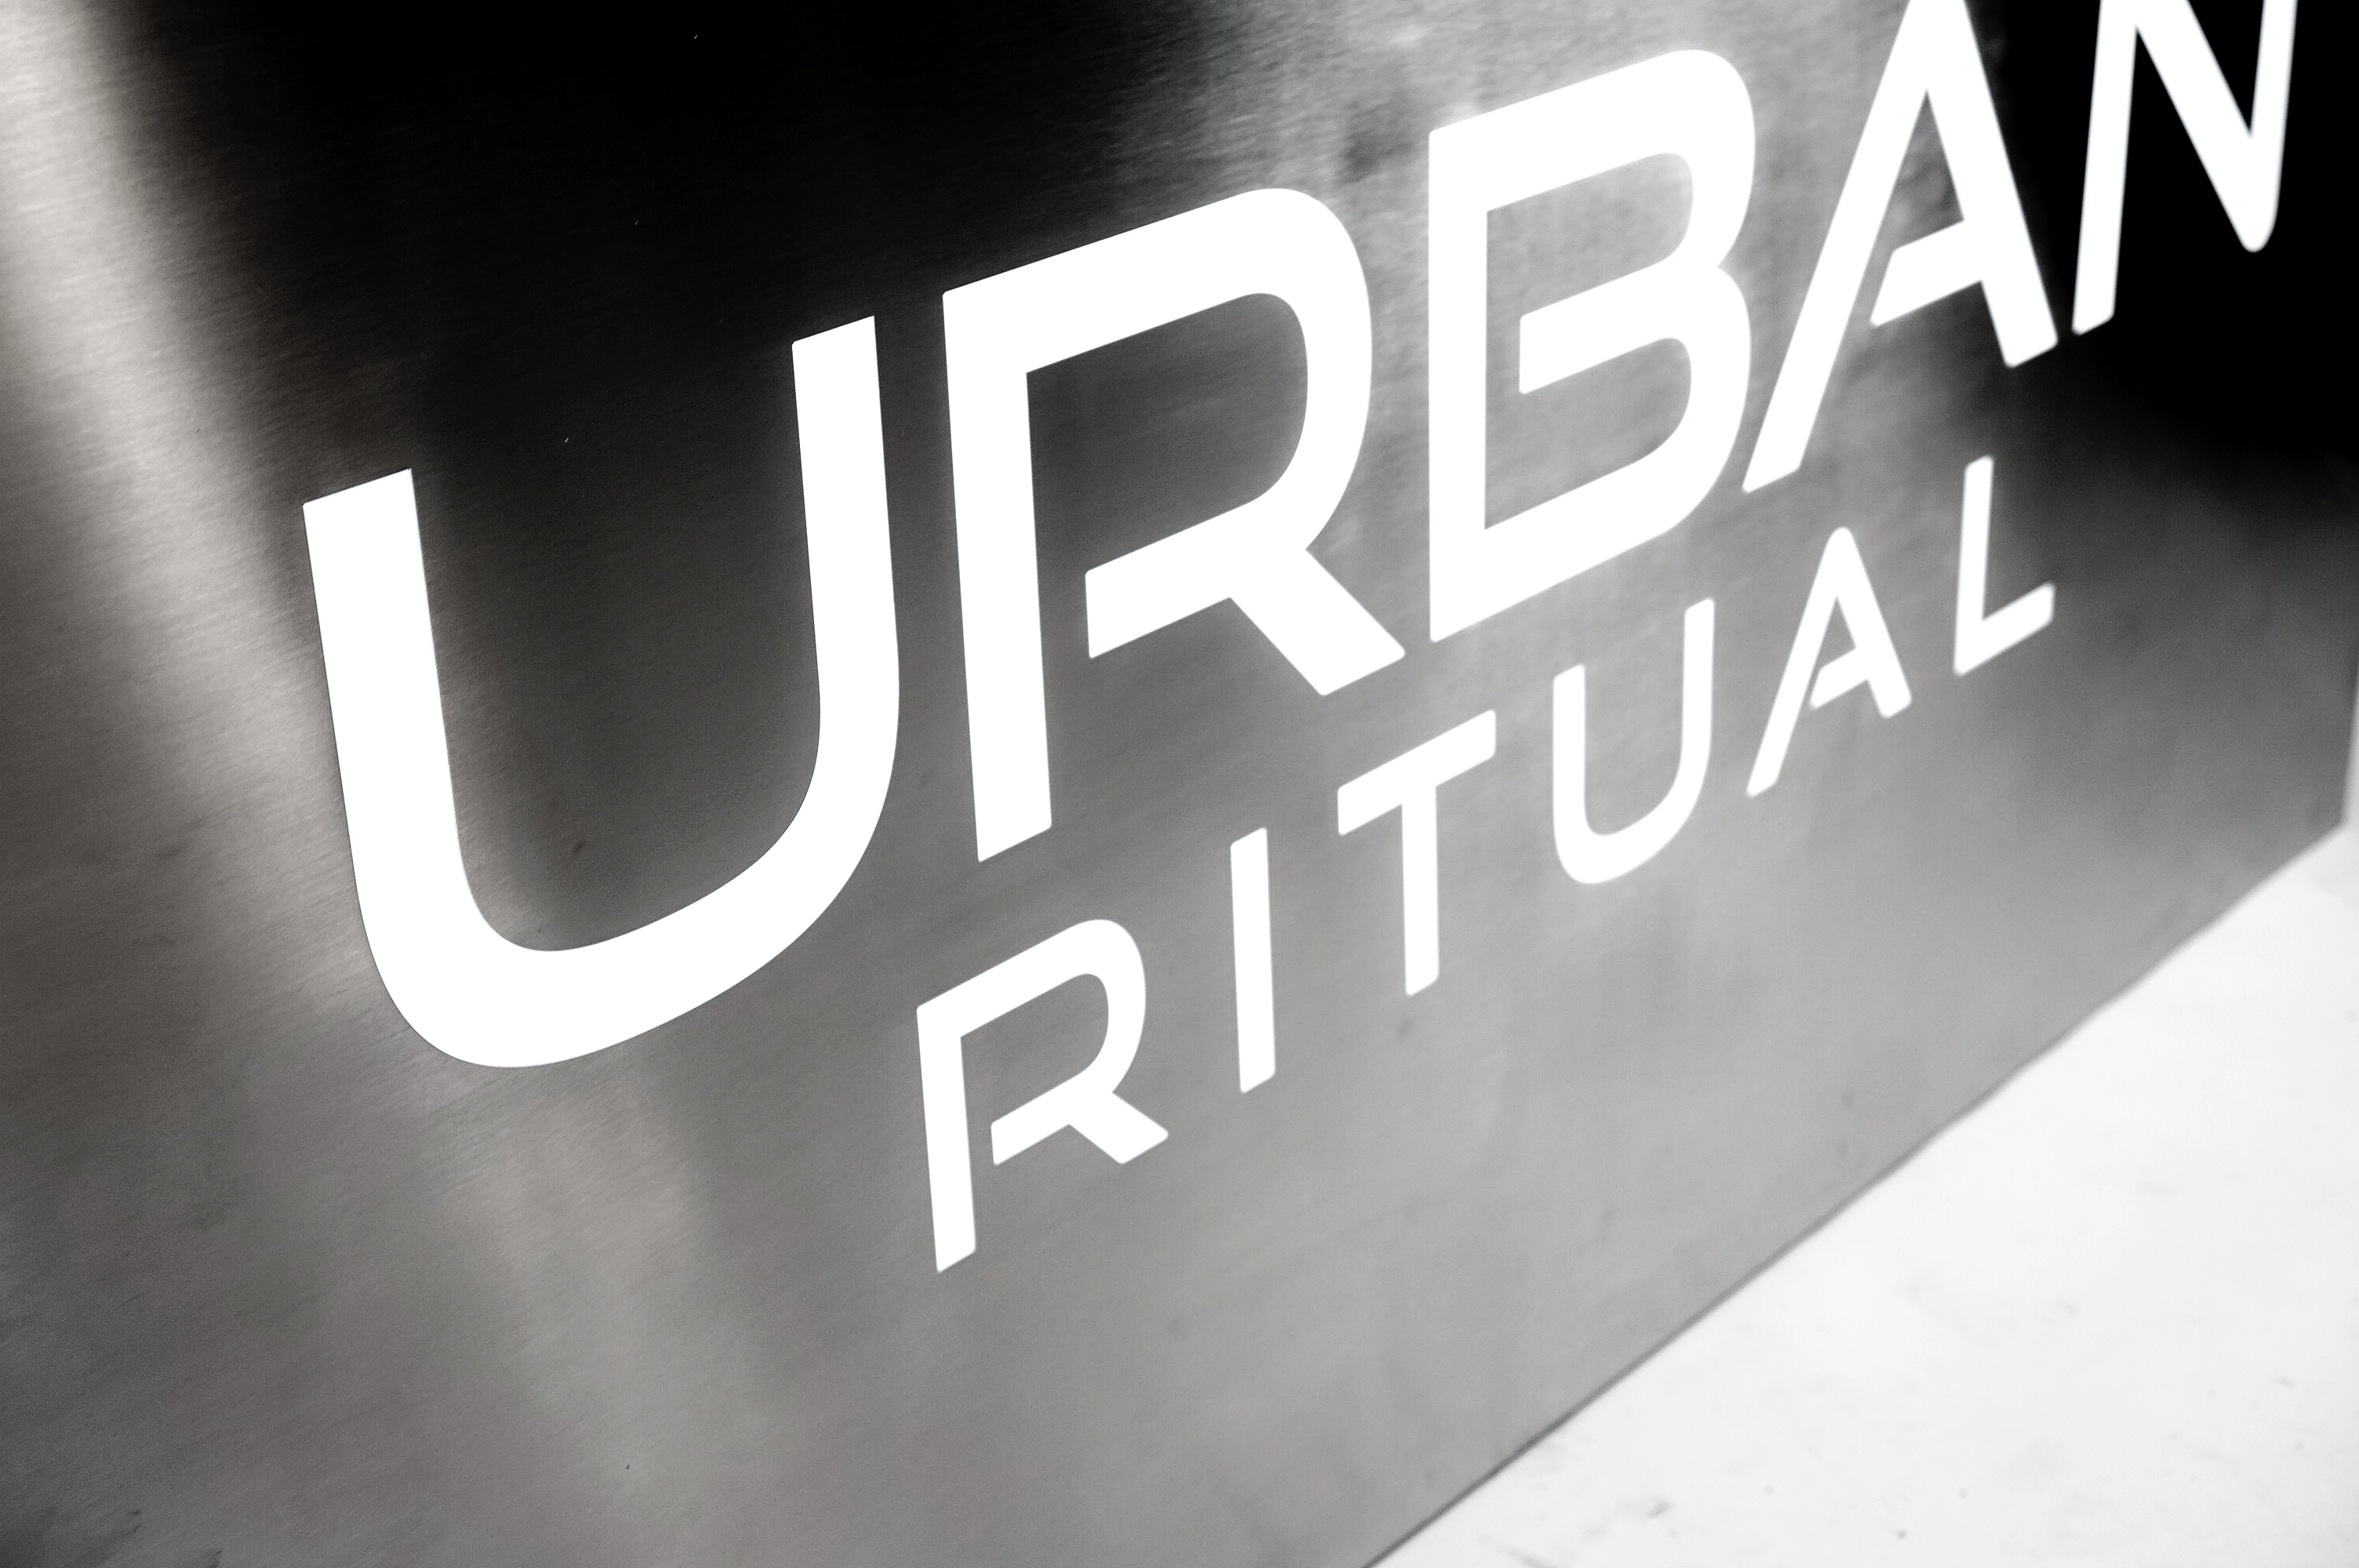 Brushed steel, interior-lit, large square wall sign for Urban Ritual, a fitness studio located in Styles Studios, a boutique fitness studio in Peoria, IL.